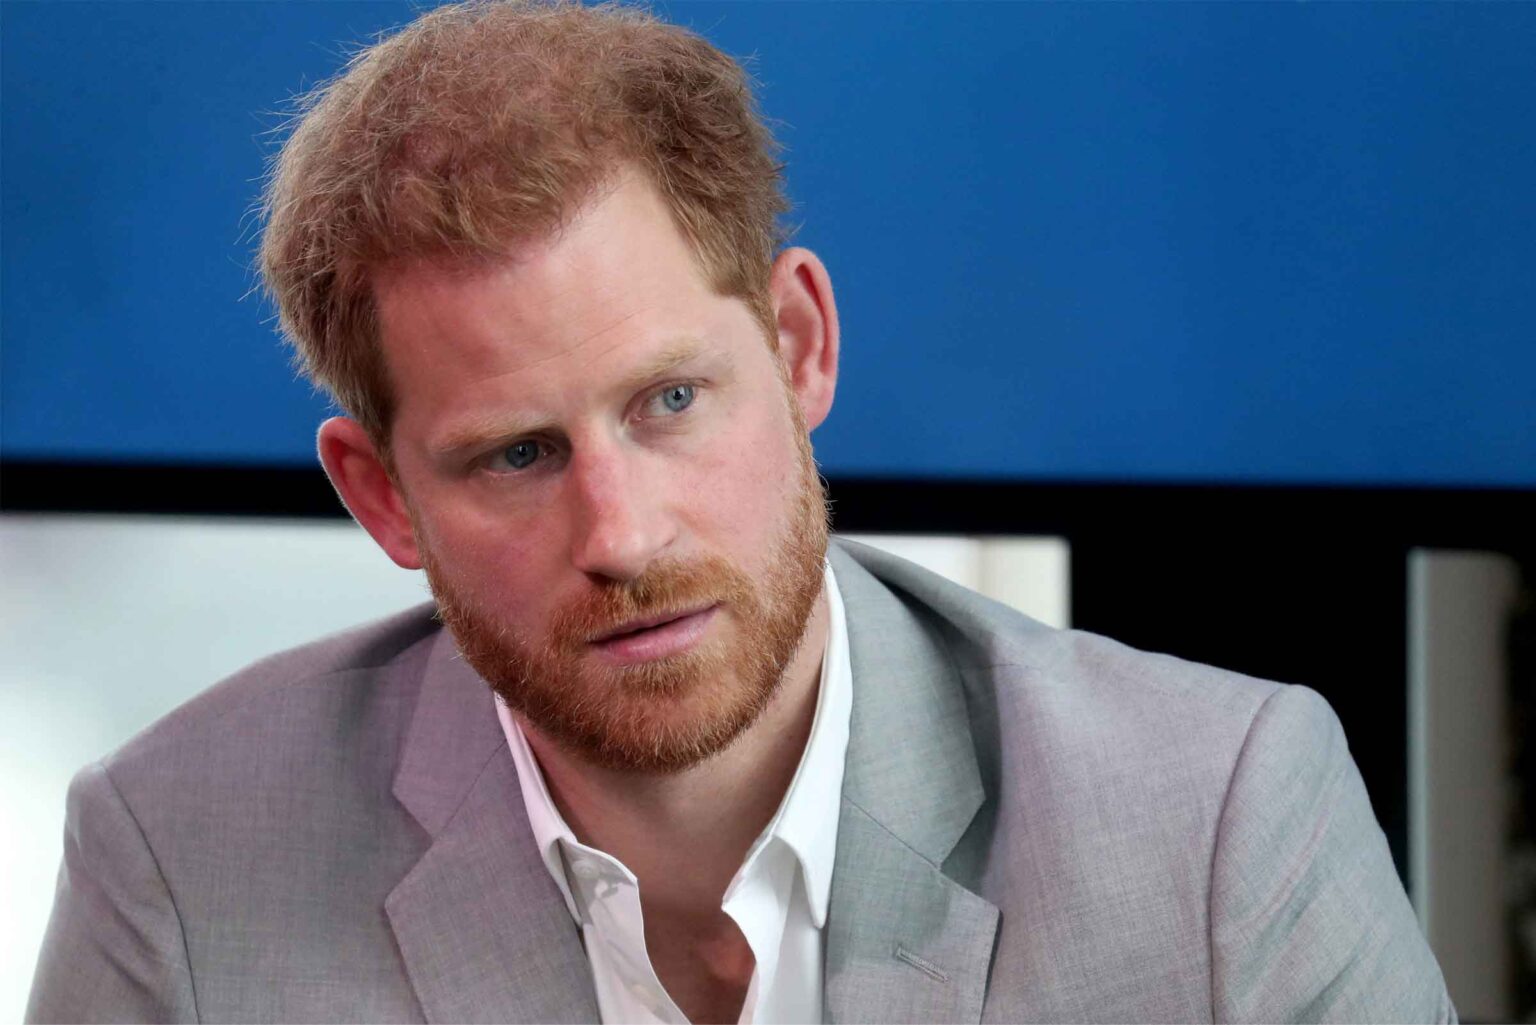 Prince Harry is making news headlines thanks to a candid interview published to 'The Late Late Show' YouTube page.